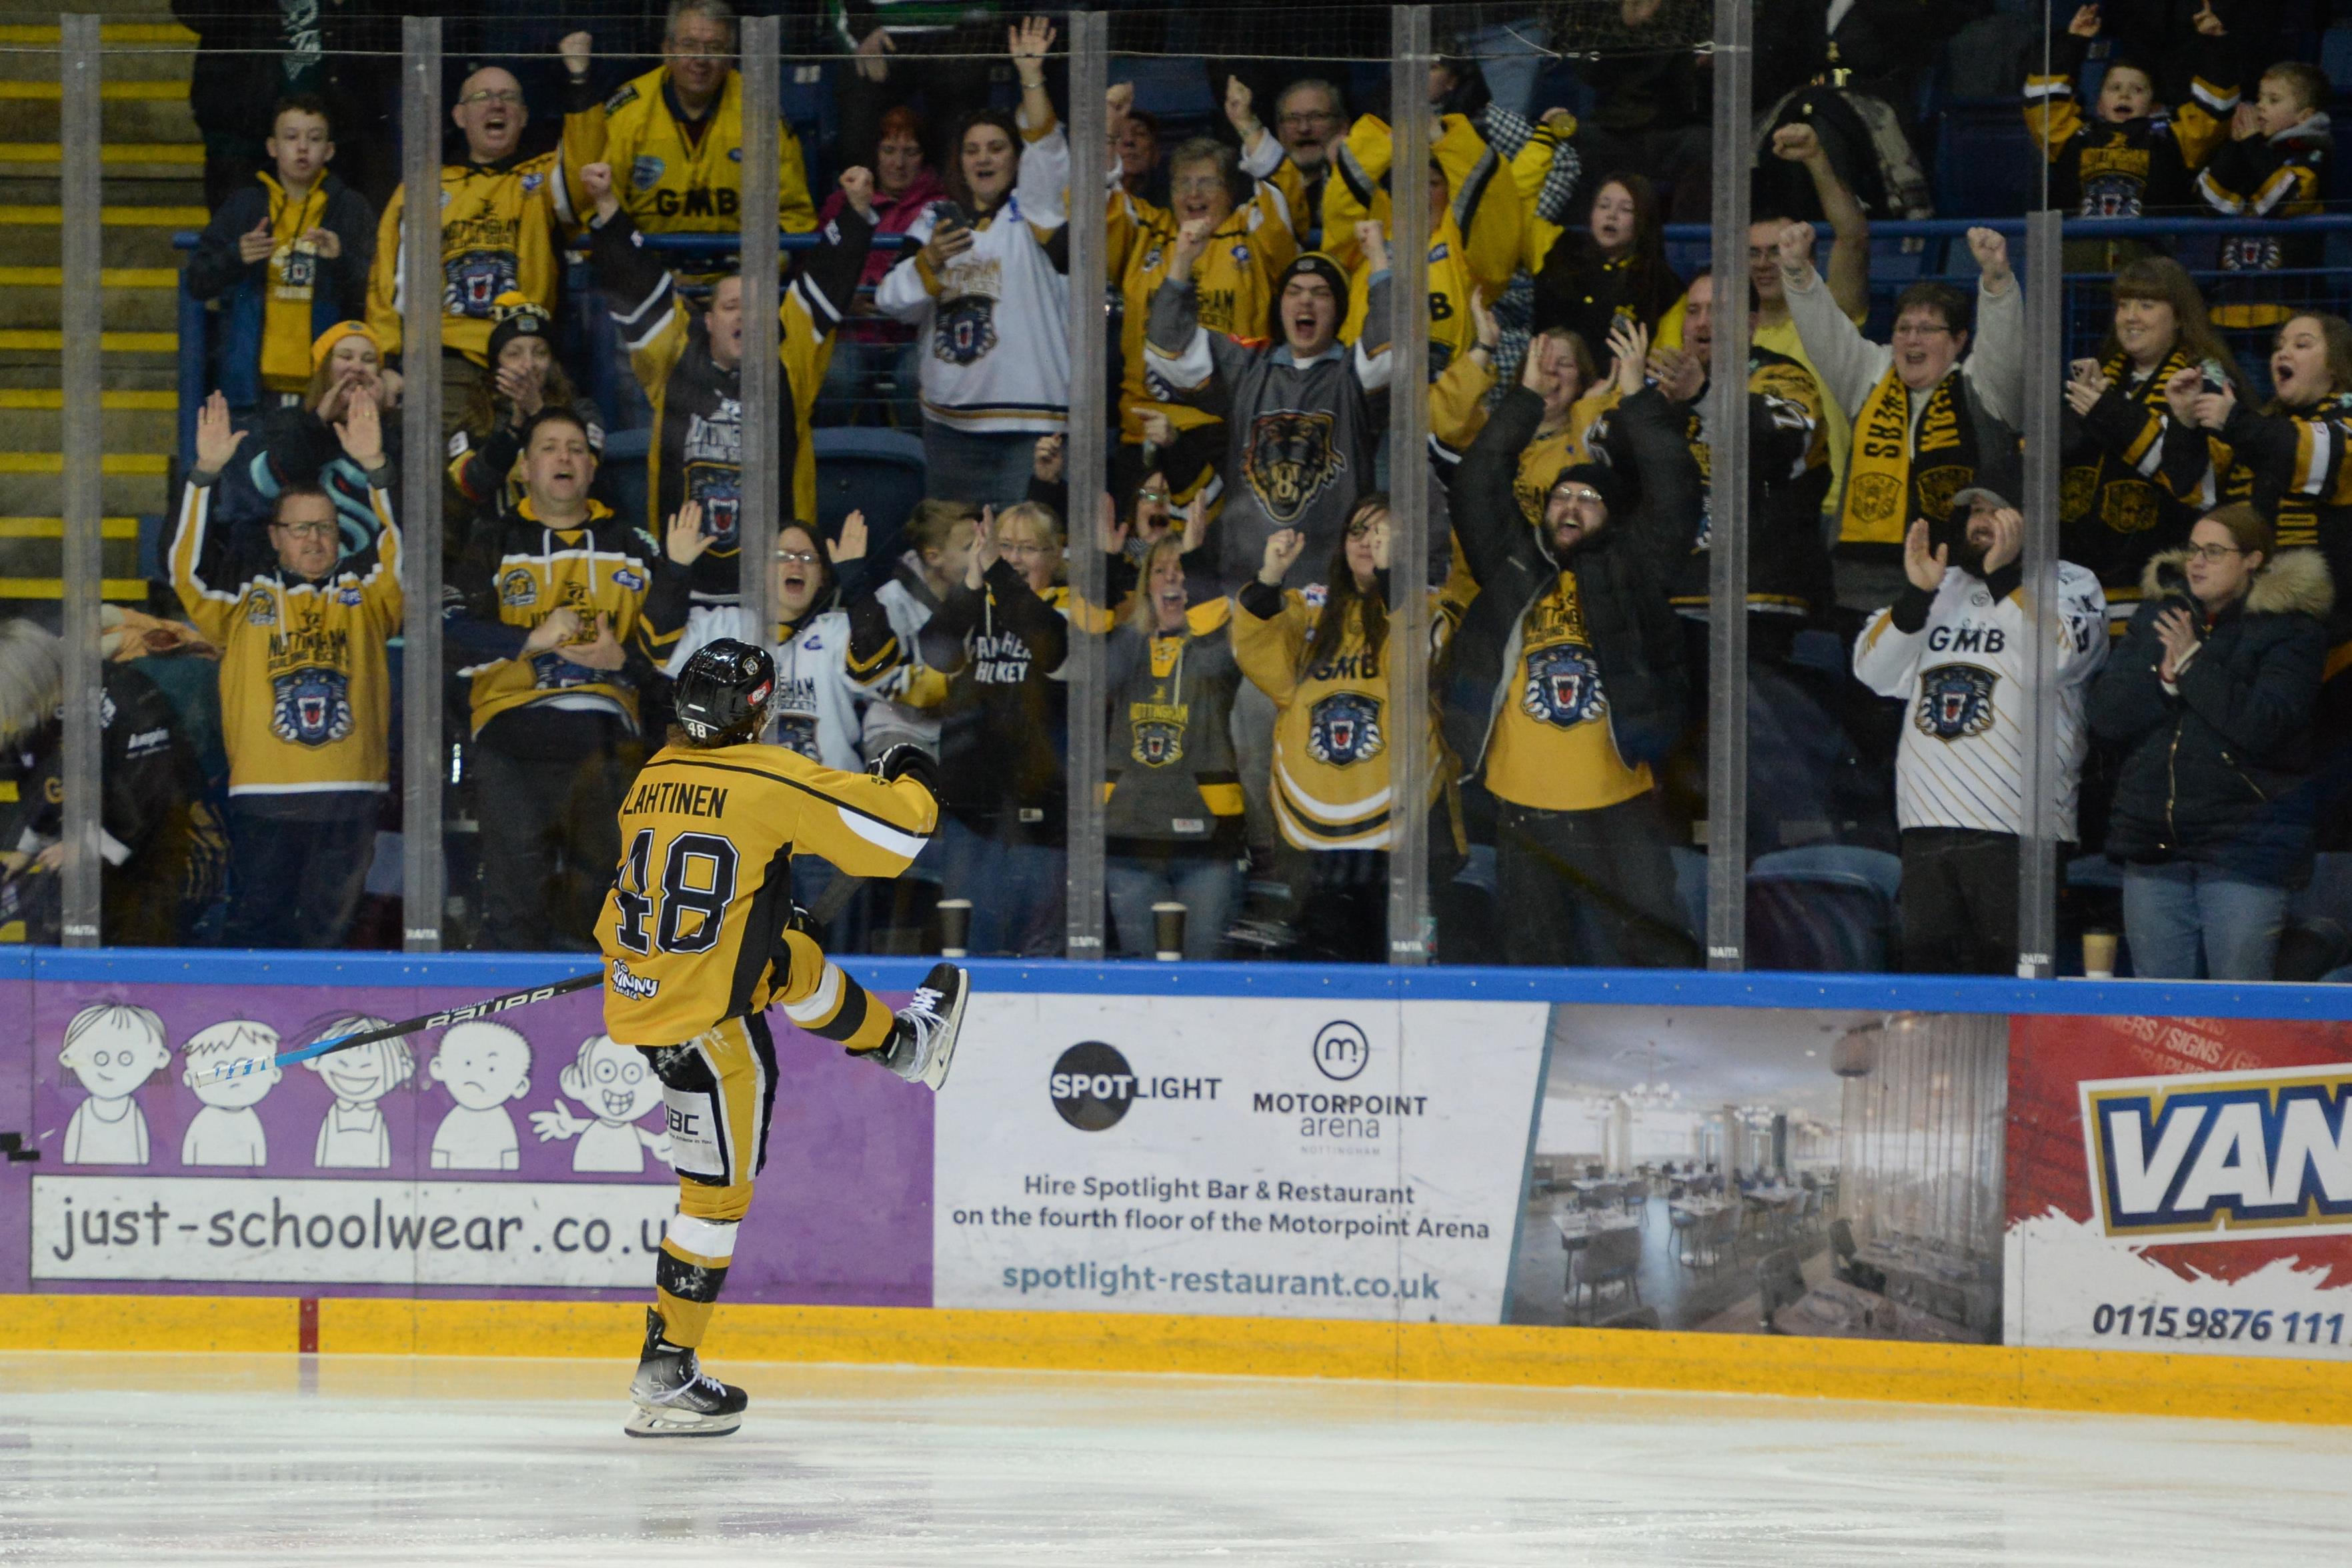 HIGHLIGHTS FROM SATURDAY'S WIN OVER DEVILS Top Image